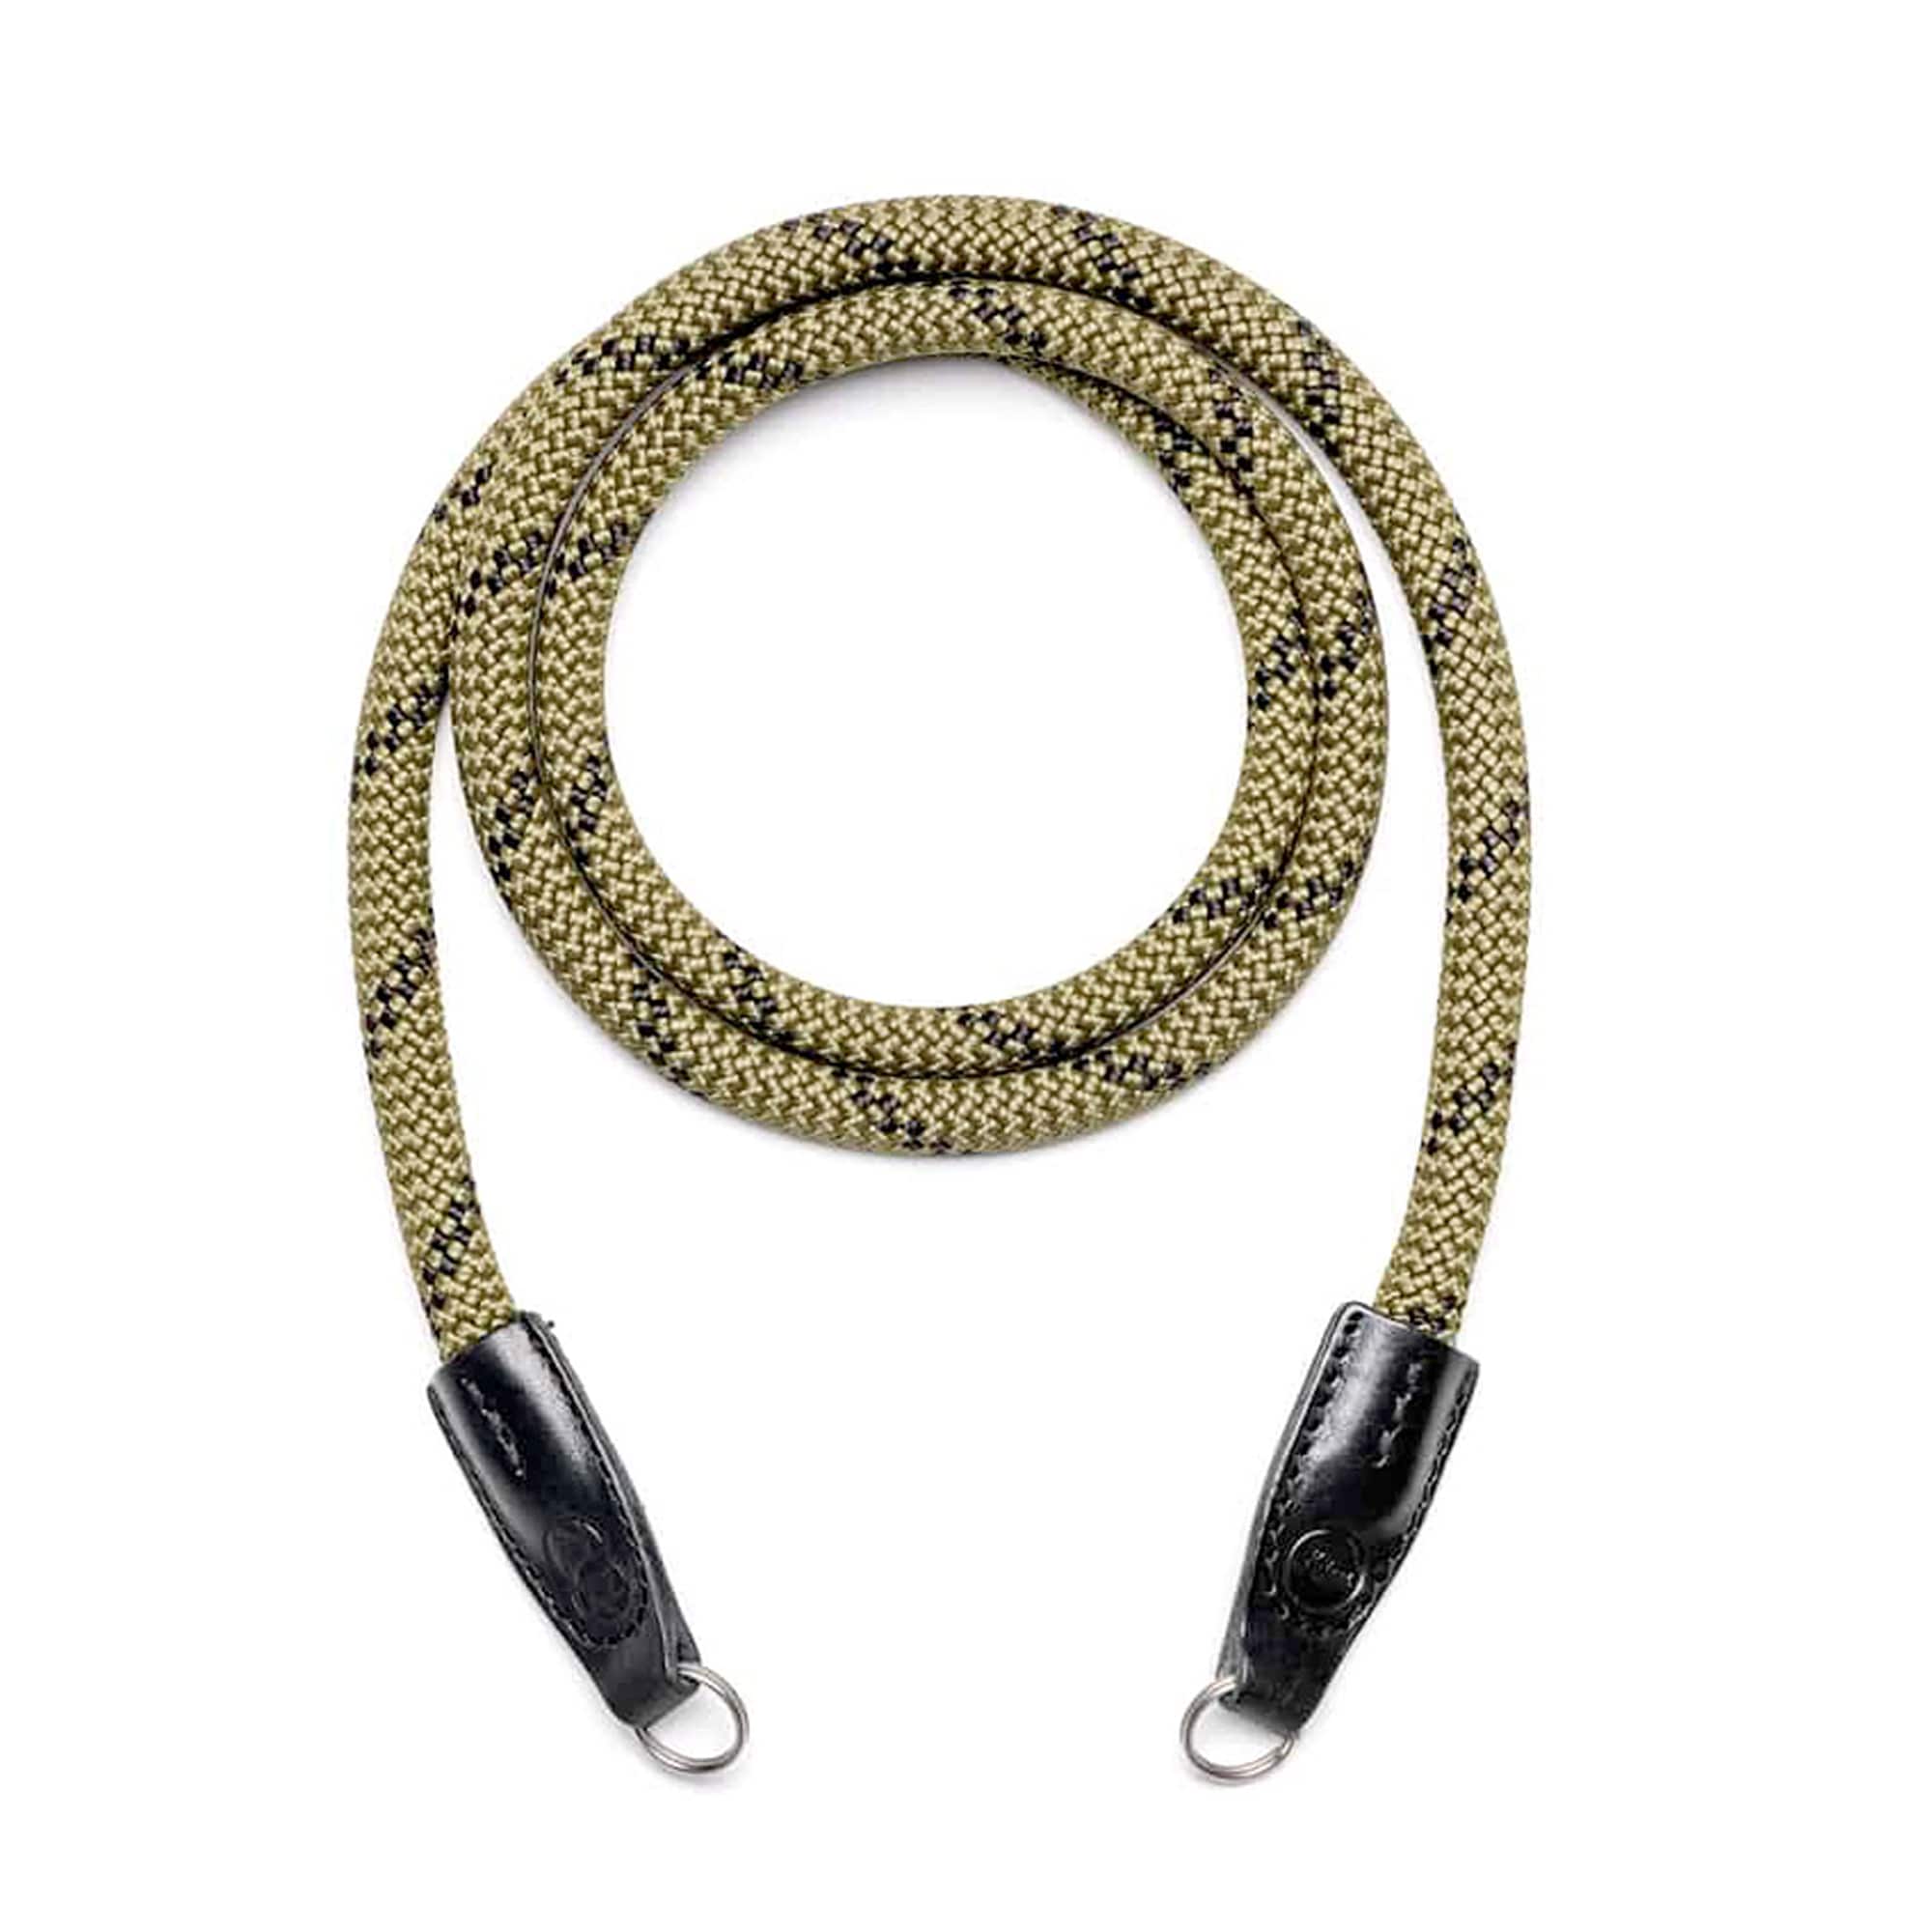 Leica Rope Strap Olive 100cm